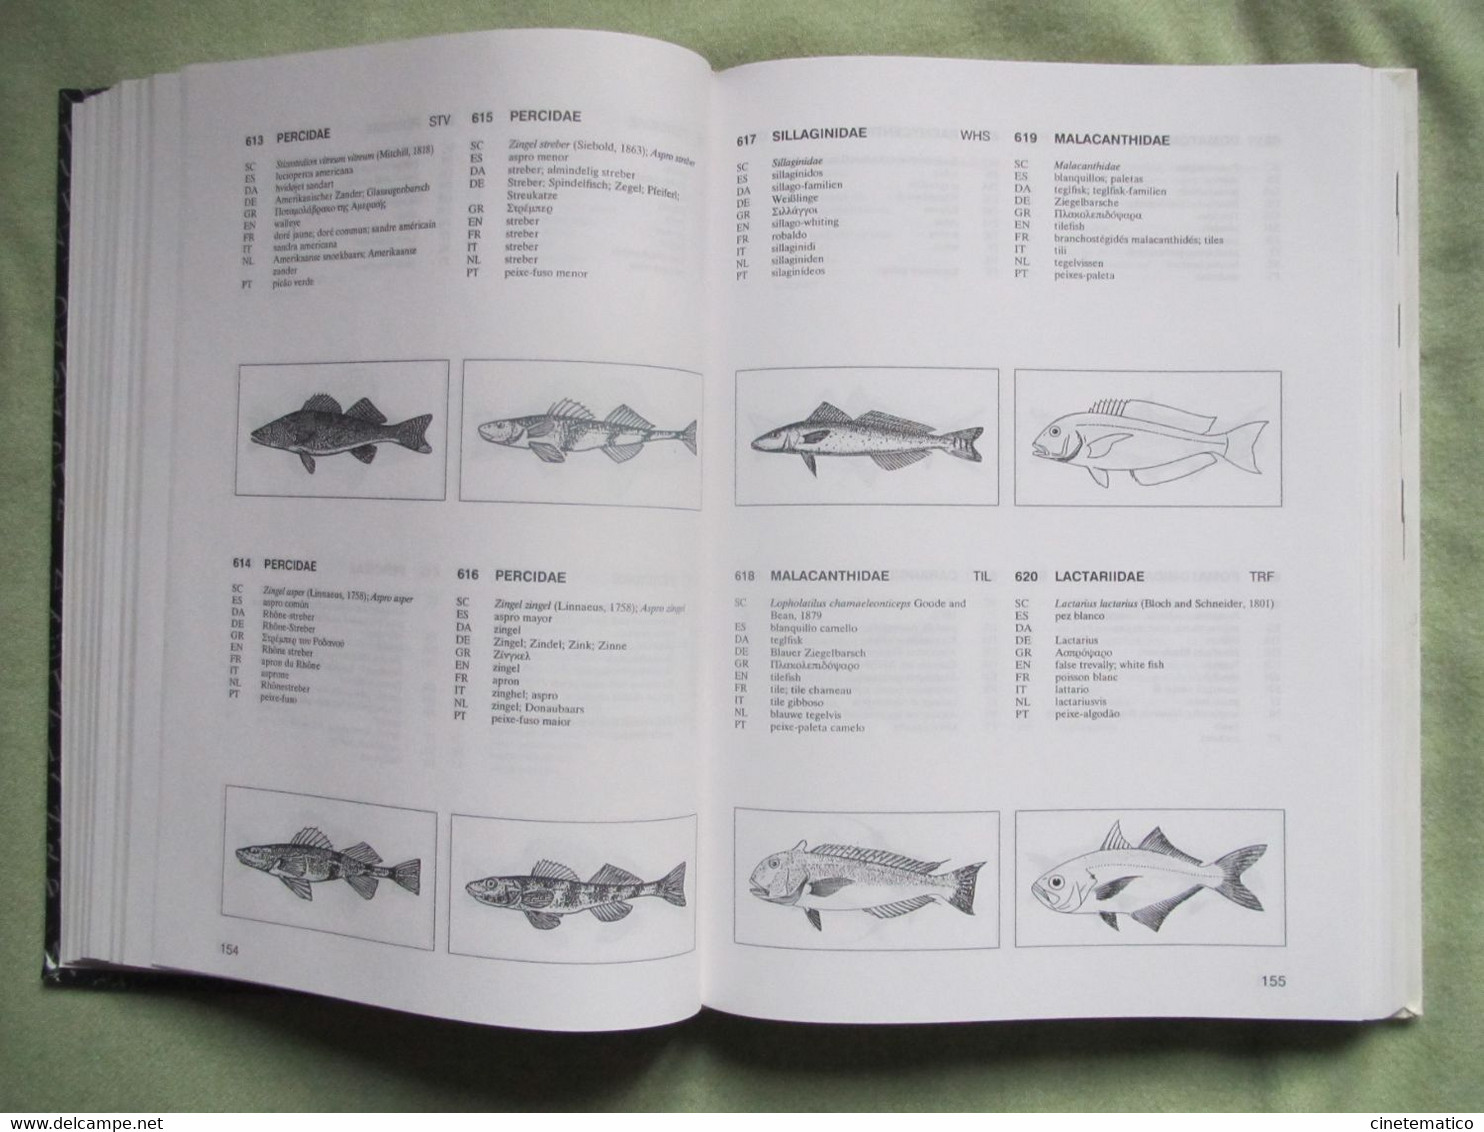 book/livre/buch/libro "Multilingual illustrated Dictionary of Aquatic Animals and Plants"